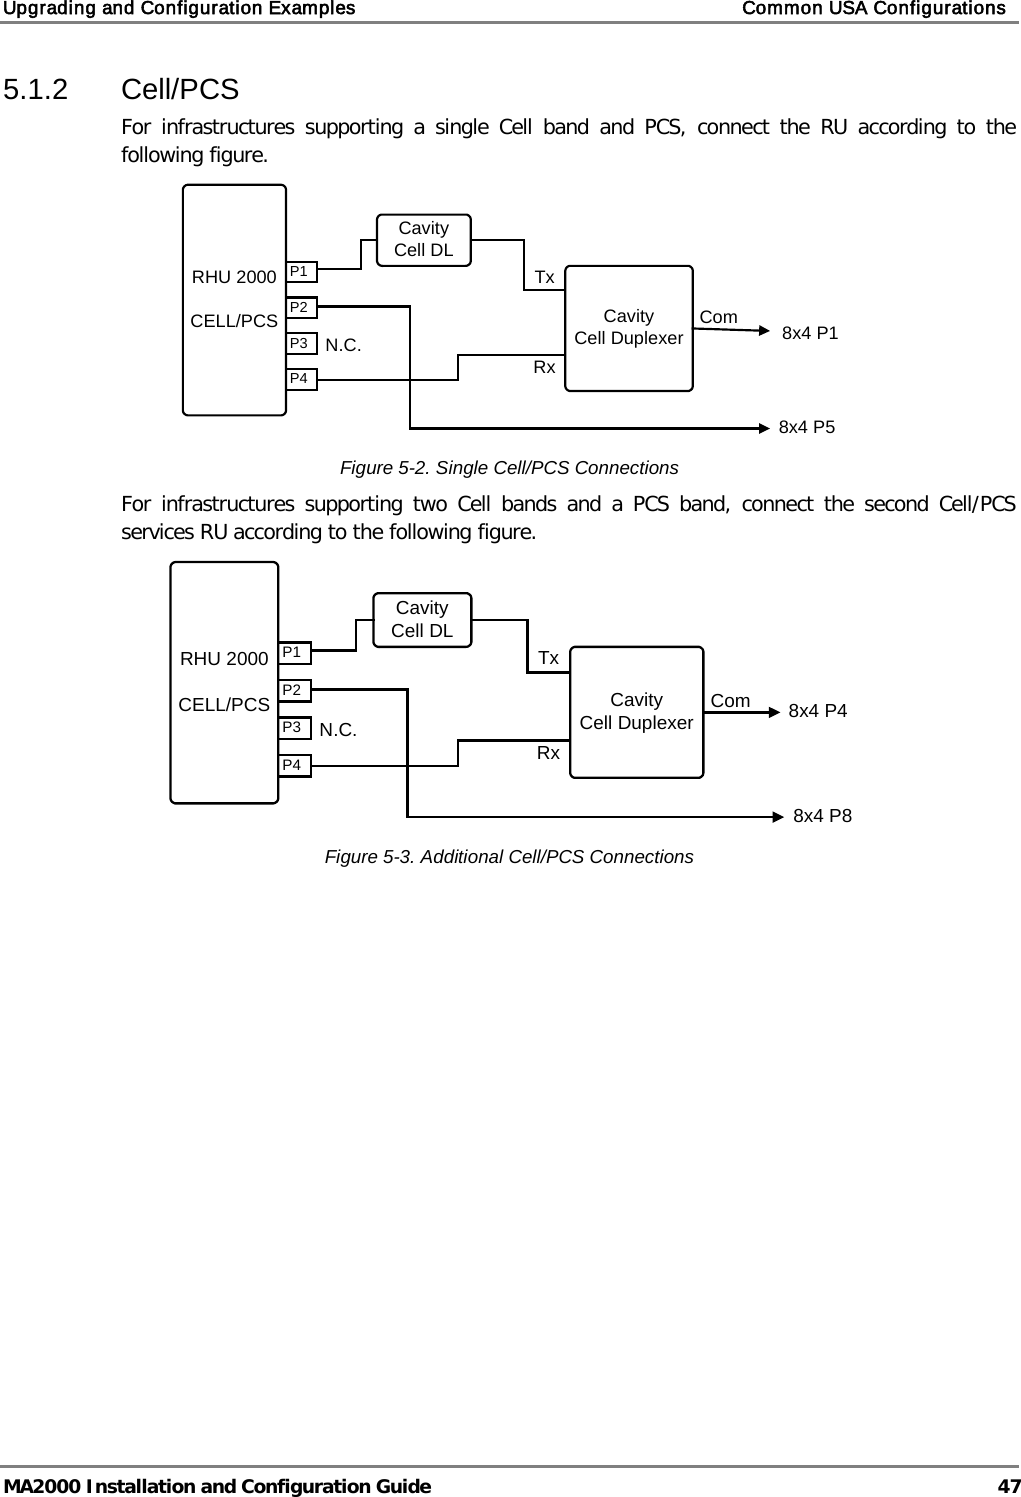 Upgrading and Configuration Examples    Common USA Configurations   MA2000 Installation and Configuration Guide  47 5.1.2  Cell/PCS For infrastructures supporting a single Cell band and PCS, connect the RU according to the following figure.  Figure  5-2. Single Cell/PCS Connections For infrastructures supporting two Cell bands and a PCS band, connect the second Cell/PCS services RU according to the following figure.  Figure  5-3. Additional Cell/PCS Connections    P1P4P3P2RHU 2000CELL/PCS Cavity Cell DuplexerN.C. 8x4 P18x4 P5CavityCell DLTxRxComP1P4P3P2RHU 2000CELL/PCS Cavity Cell DuplexerN.C. 8x4 P48x4 P8CavityCell DLTxRxCom